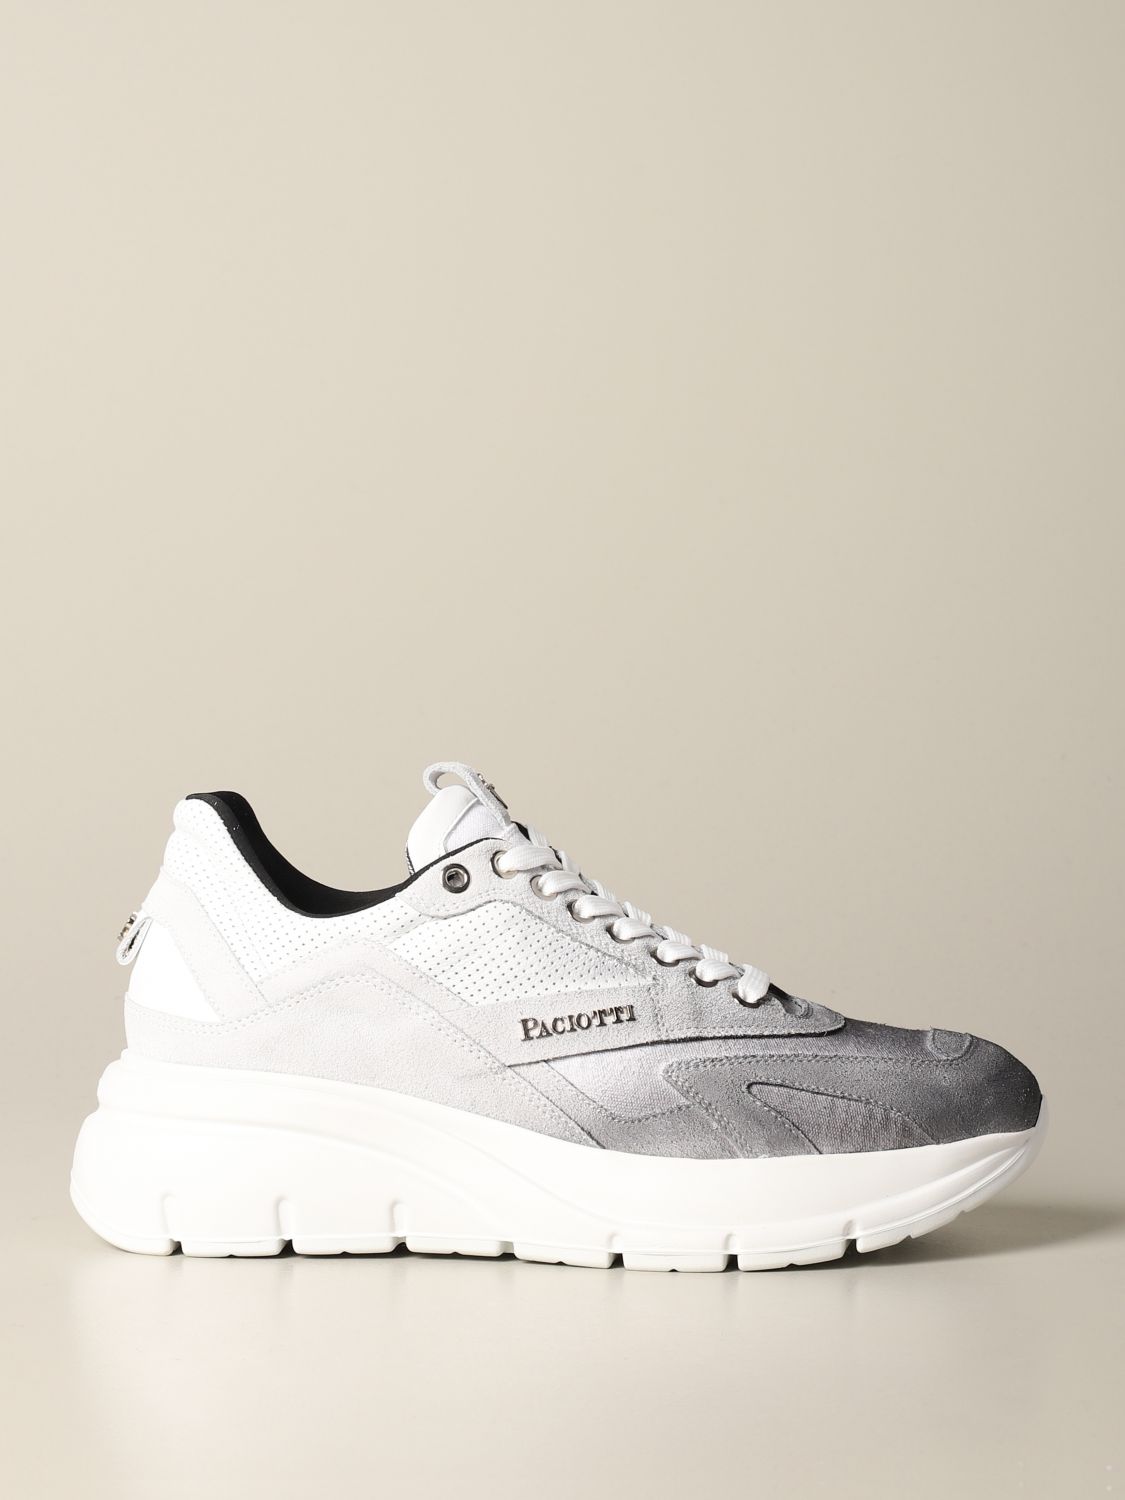 Paciotti 4Us Outlet: sneakers for man - Black | Paciotti 4Us sneakers ...